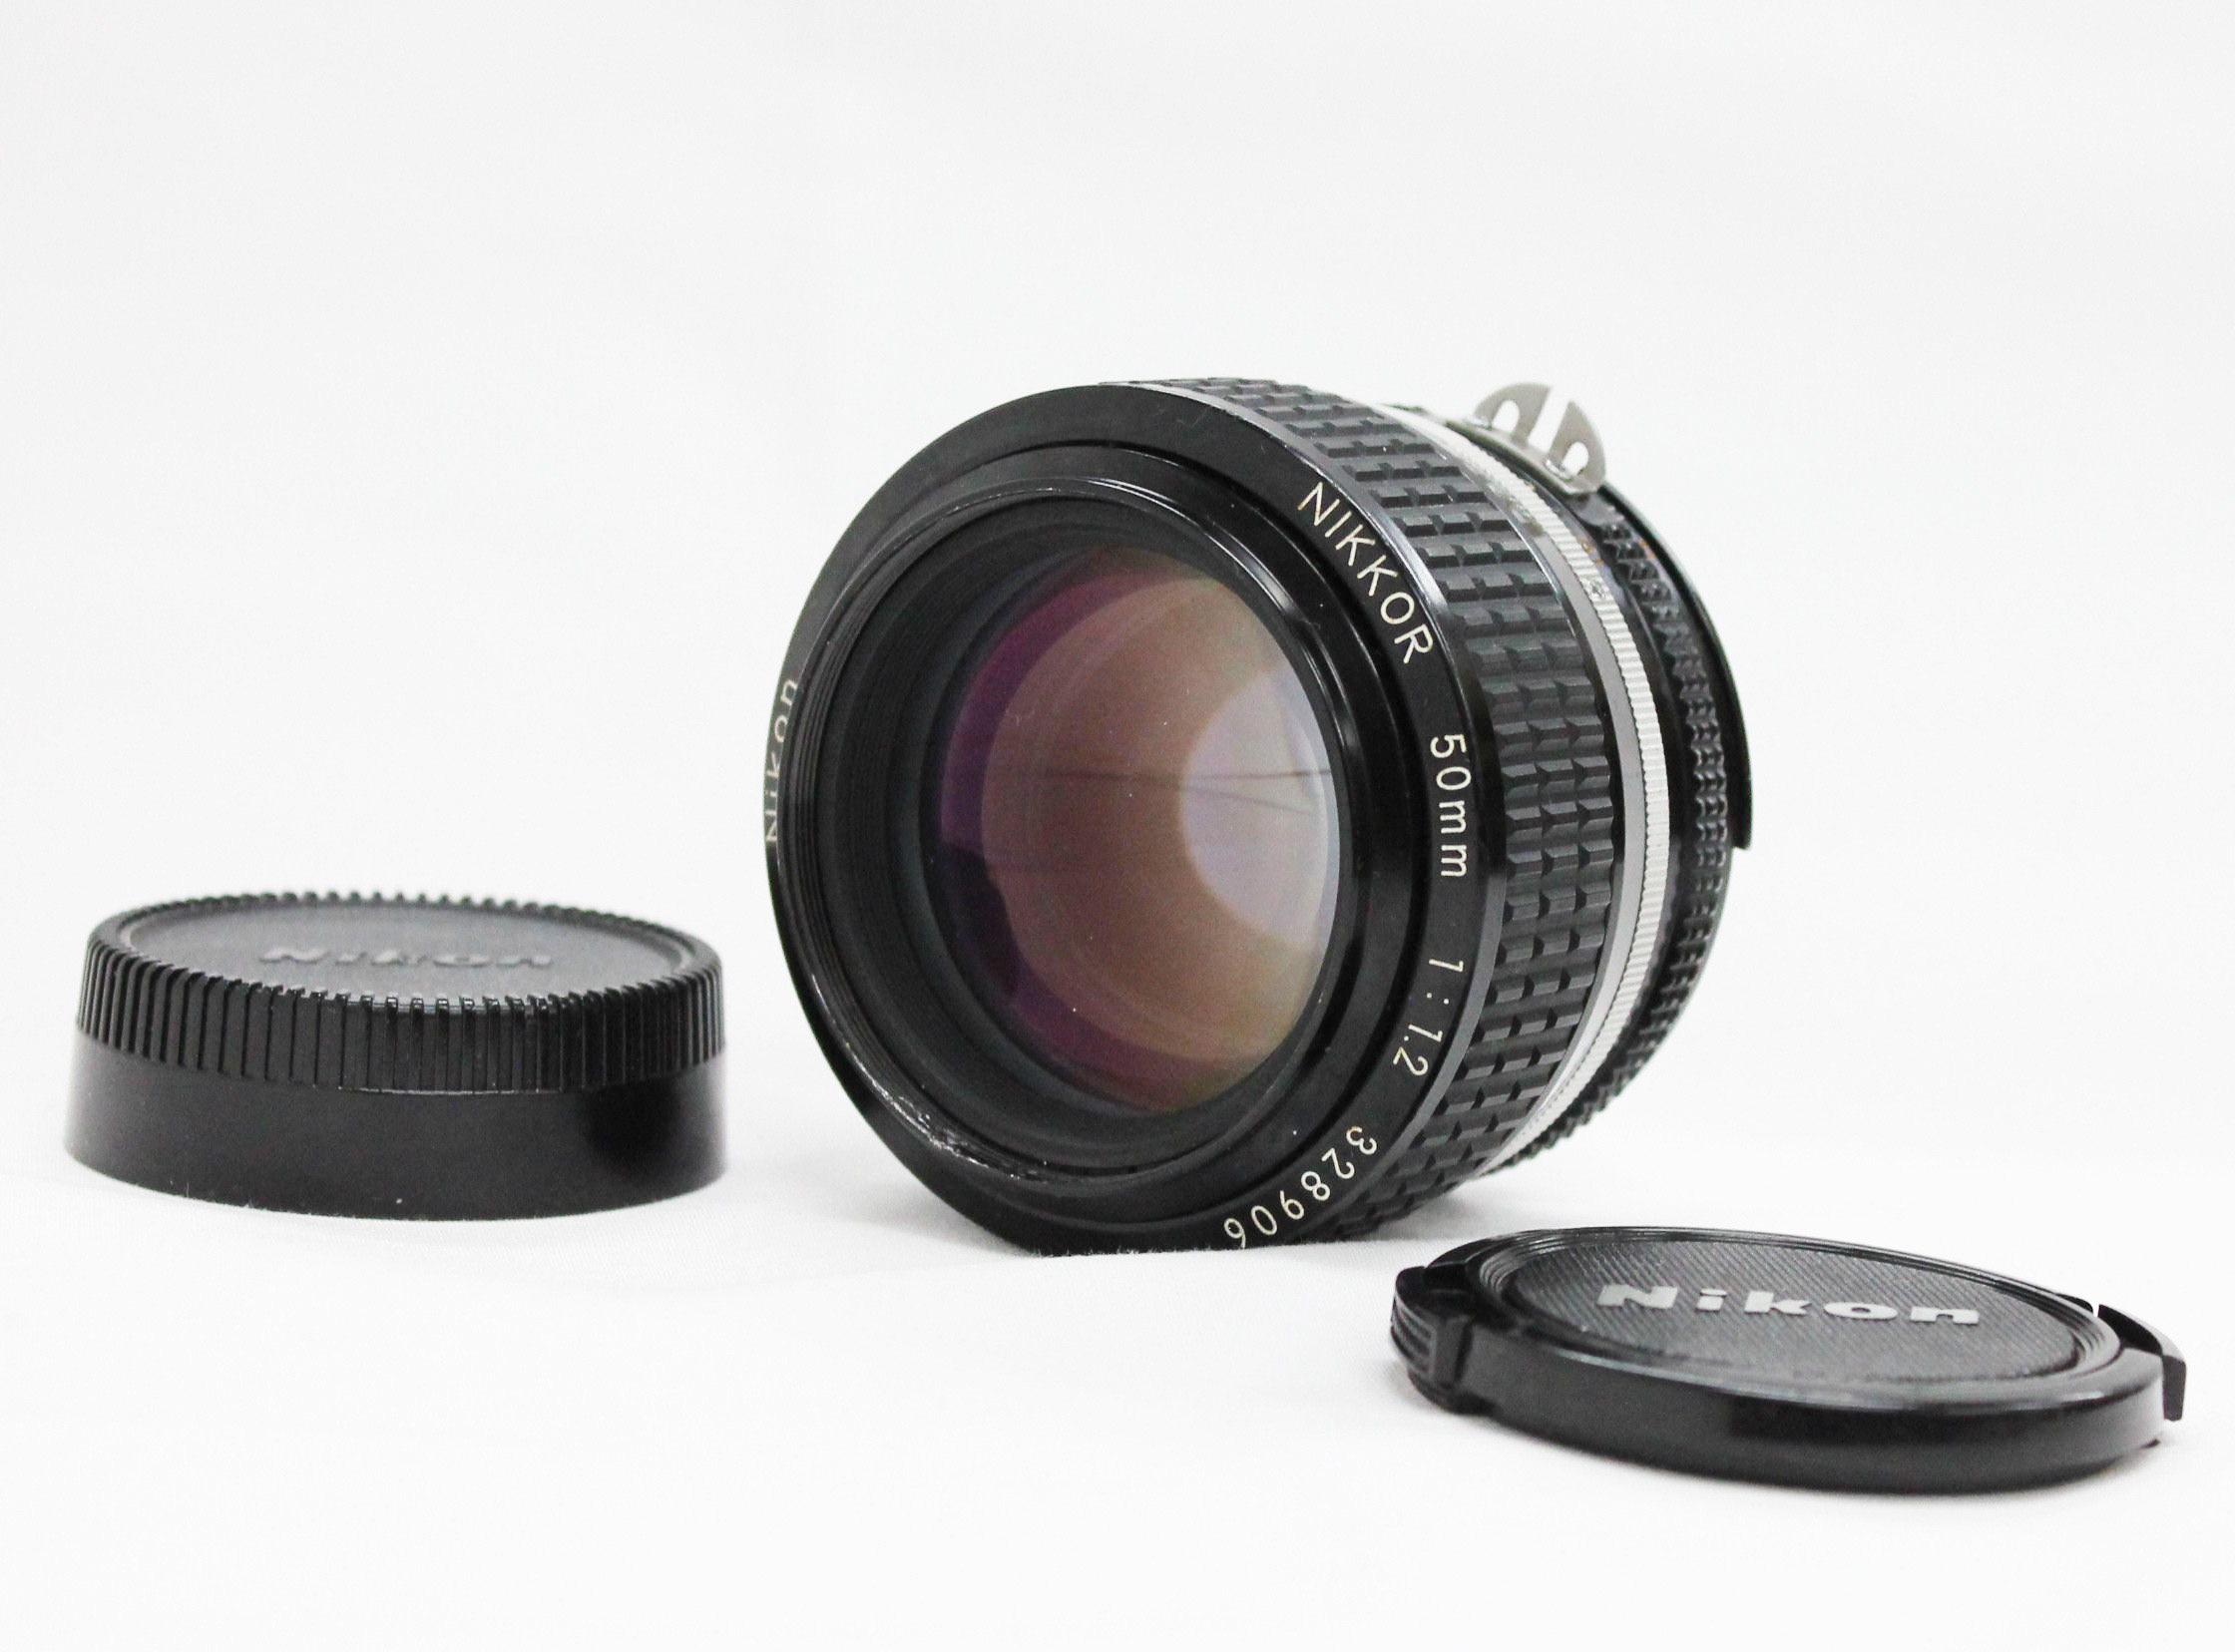 Japan Used Camera Shop | [Excellent+++] Nikon Ai-s AIS Nikkor 50mm F/1.2 MF Lens from Japan